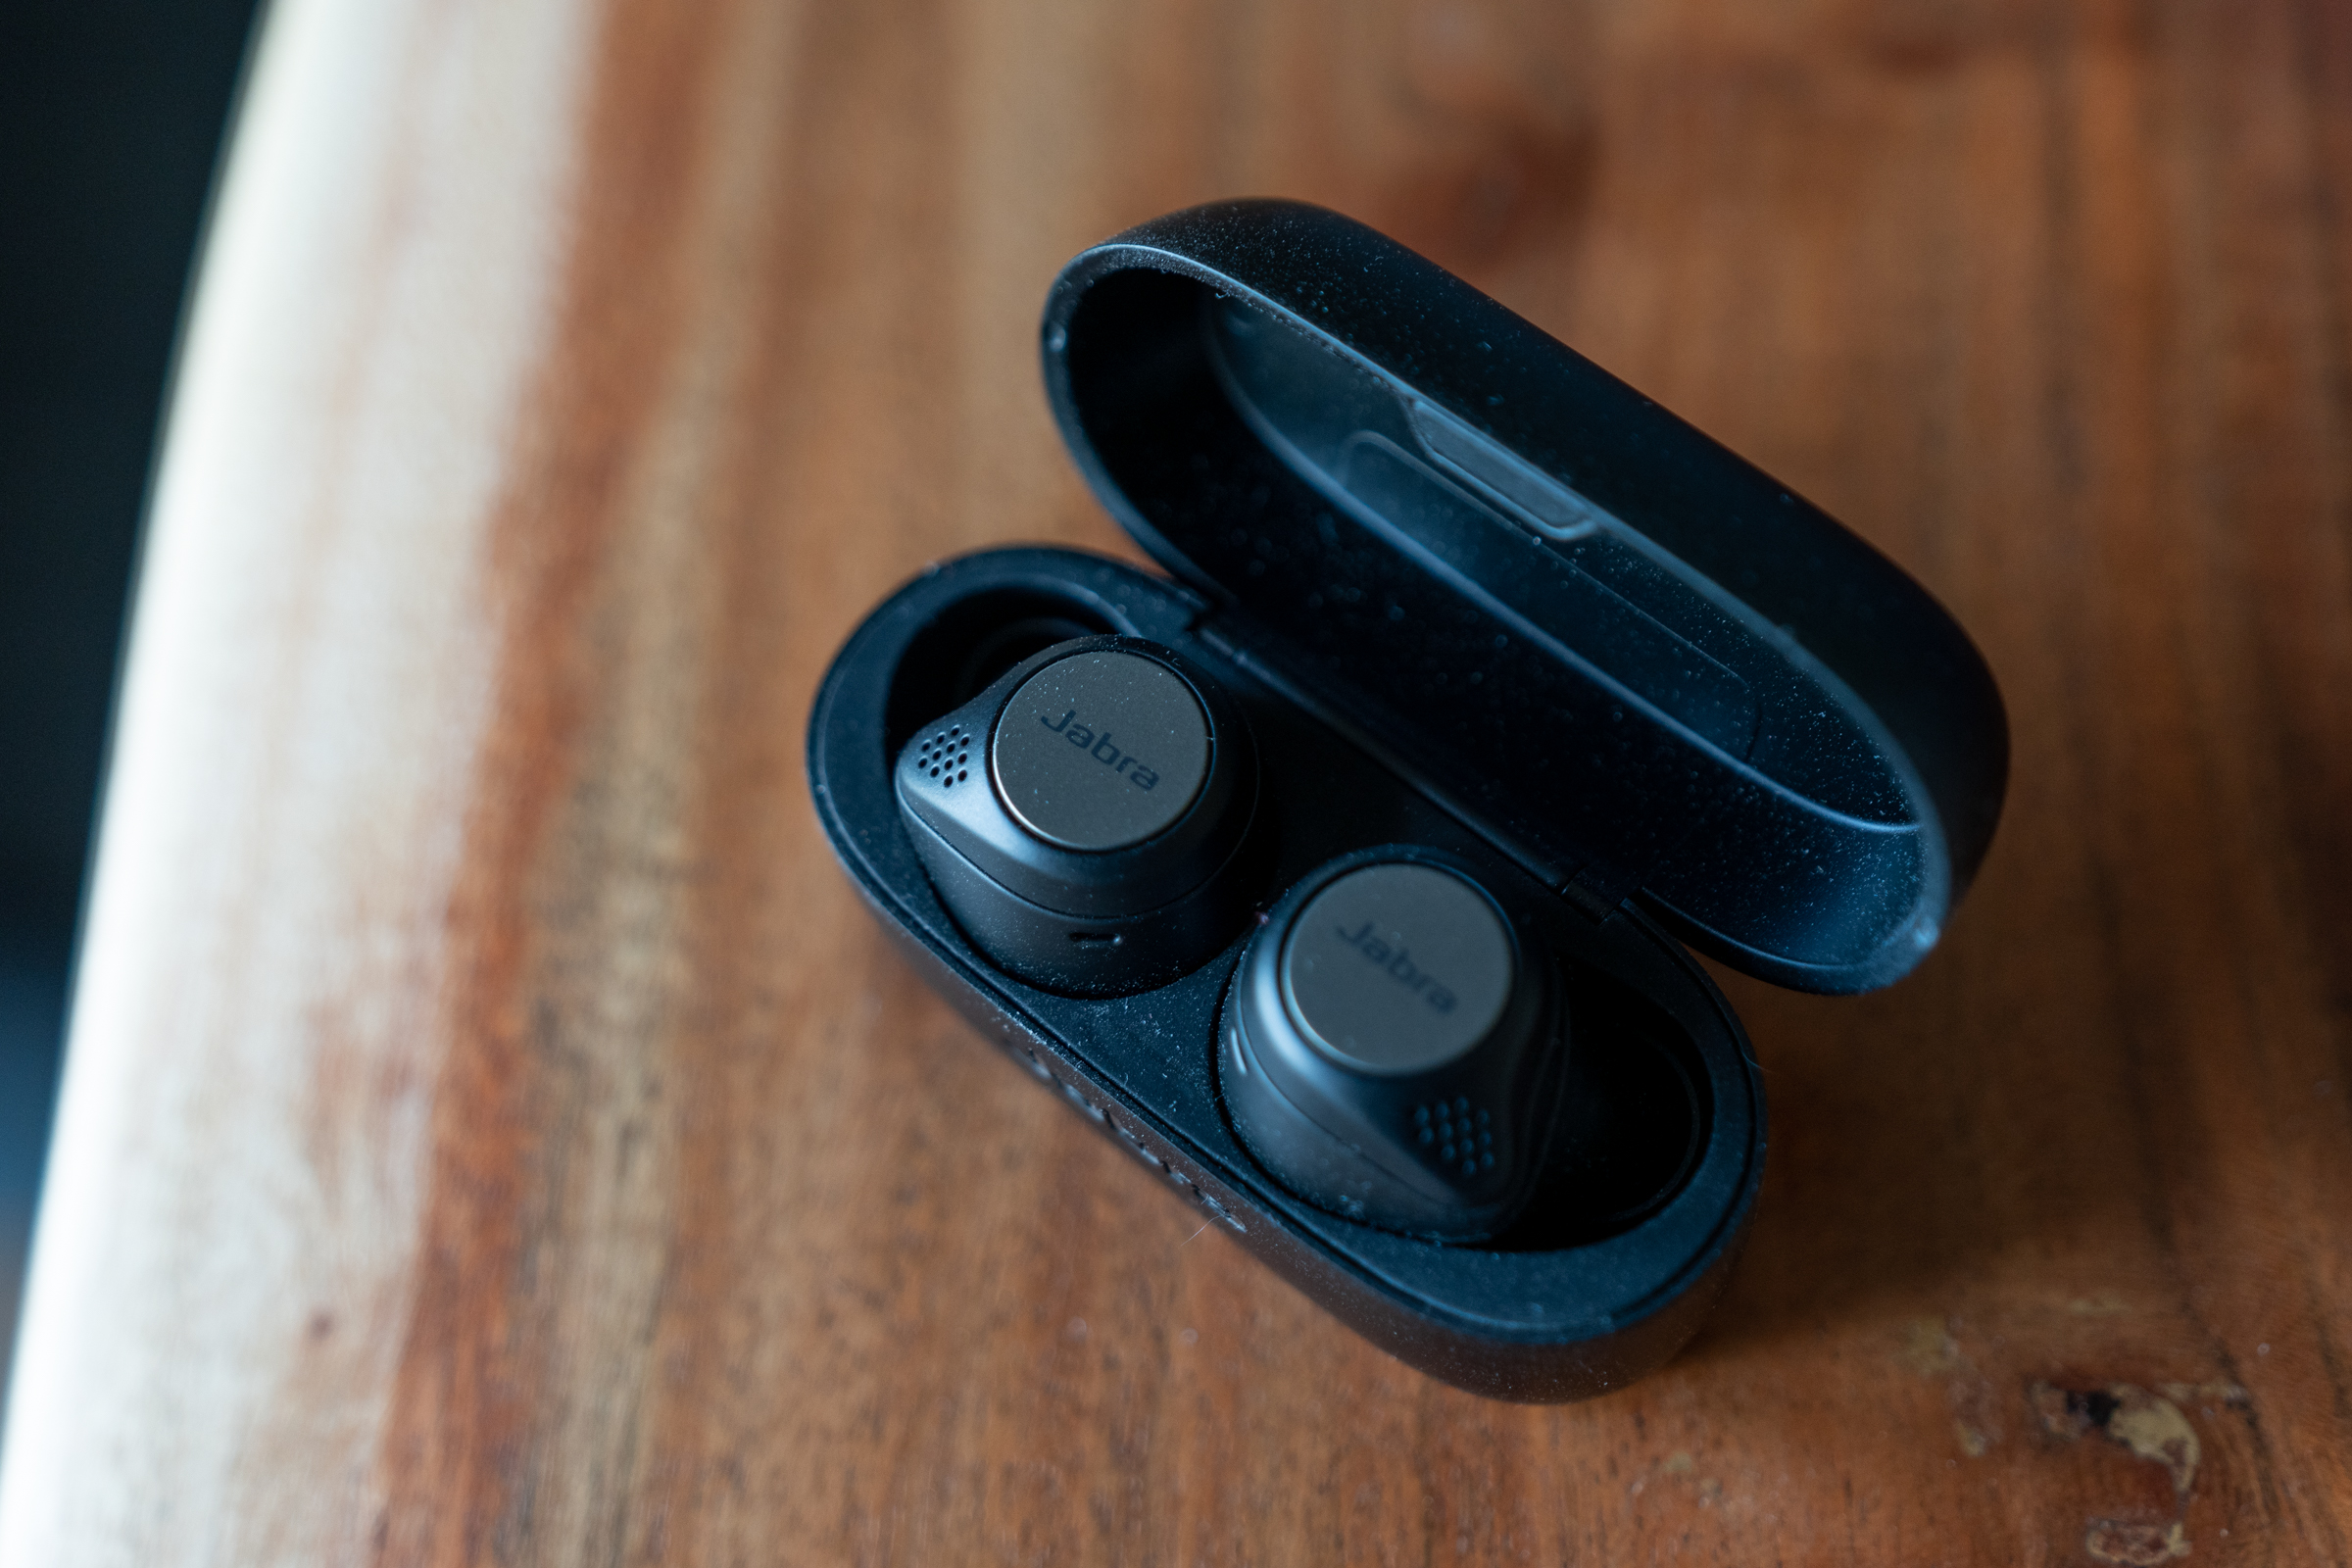 Jabra’s Elite Active 75t earbuds offer great value and sound for both workouts and workdays